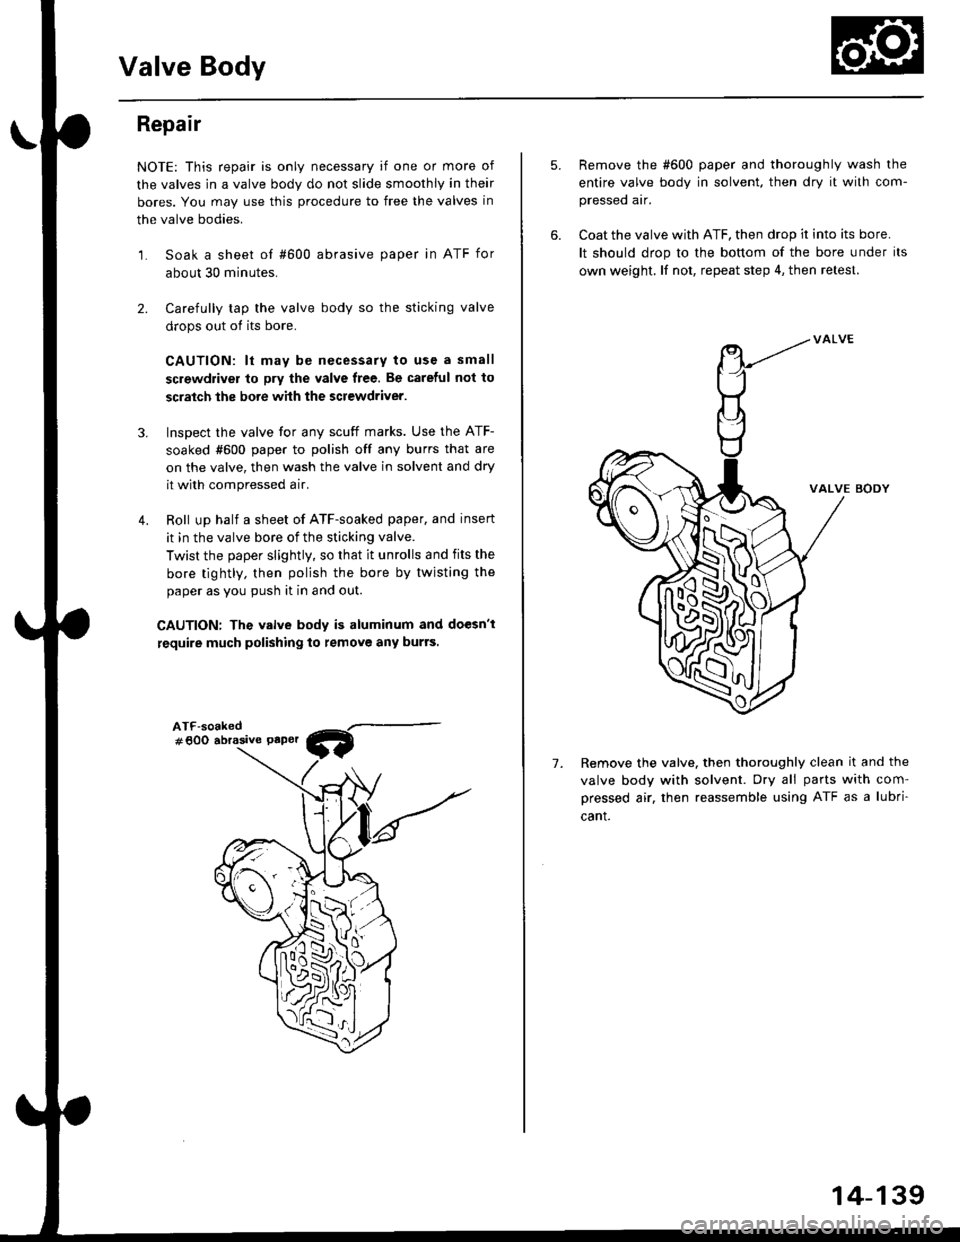 HONDA CIVIC 1997 6.G Workshop Manual Valve Body
2.
Repair
NOTE: This repair is only necessary if one or more of
the valves in a valve body do not slide smoothly in their
bores. You may use this procedure to free the valves in
the valve b